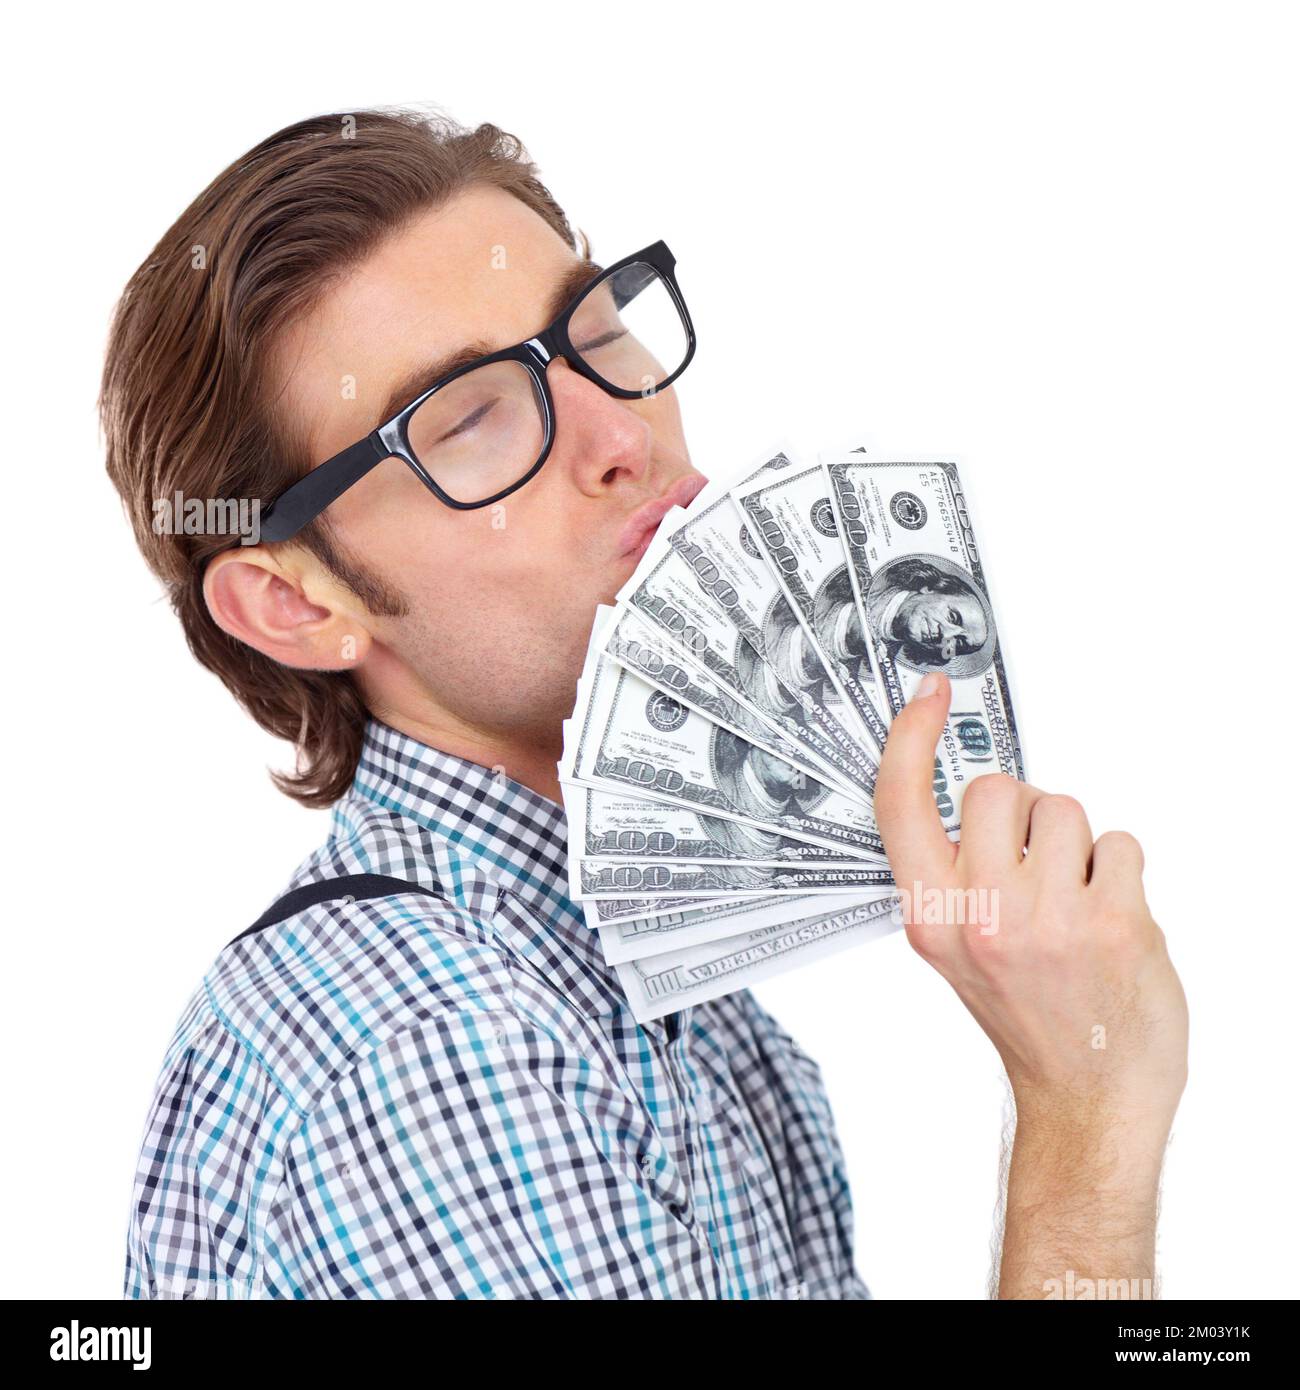 Making money is his passion. A young man kissing a wad of cash. Stock Photo